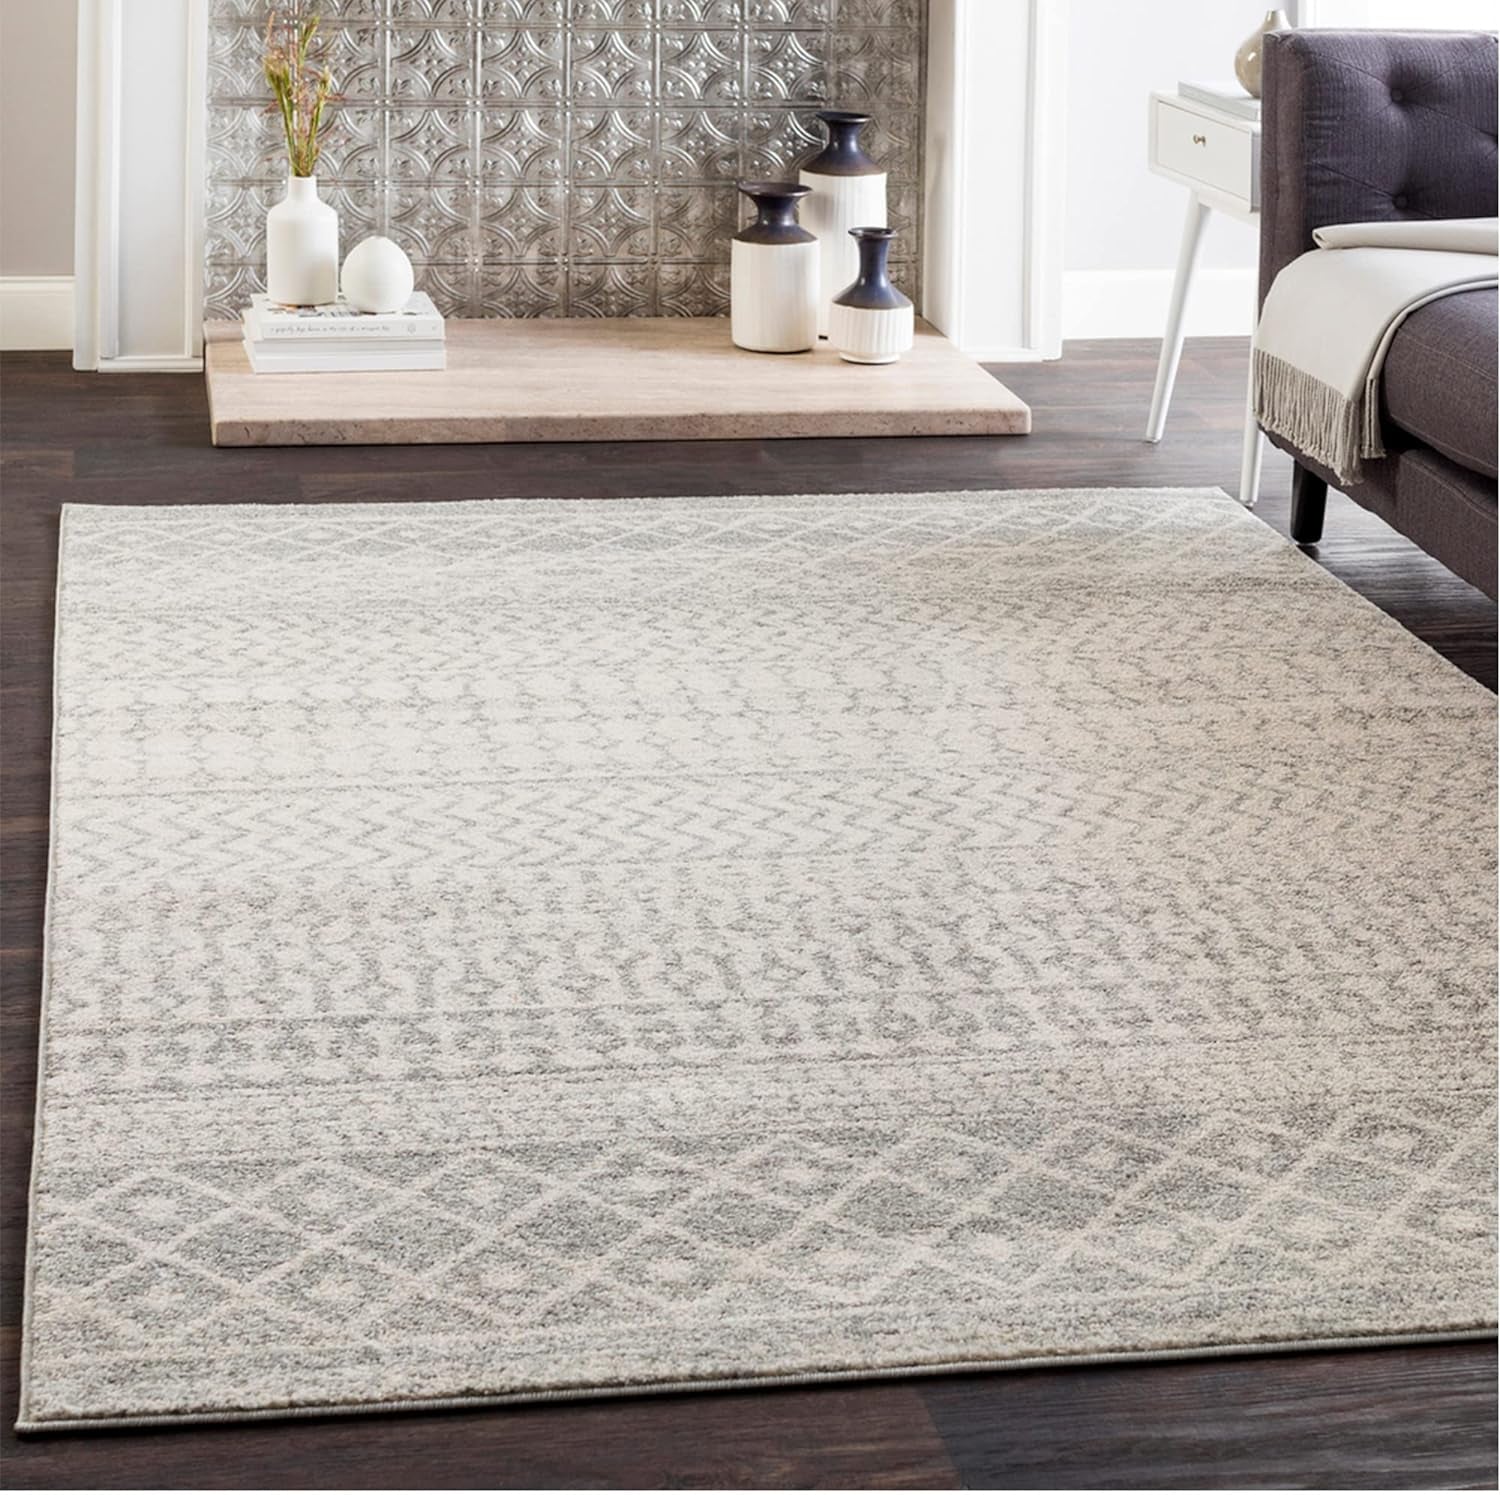 Surya Nice Geometric Rug - Scandi Area Rugs Living Room, Dining, Kitchen - Modern Aztec Abstract Rugs for Bedroom - Berber Boho Rug Style, Easy Care - Large Rug 120X170Cm Light Grey and White Rug